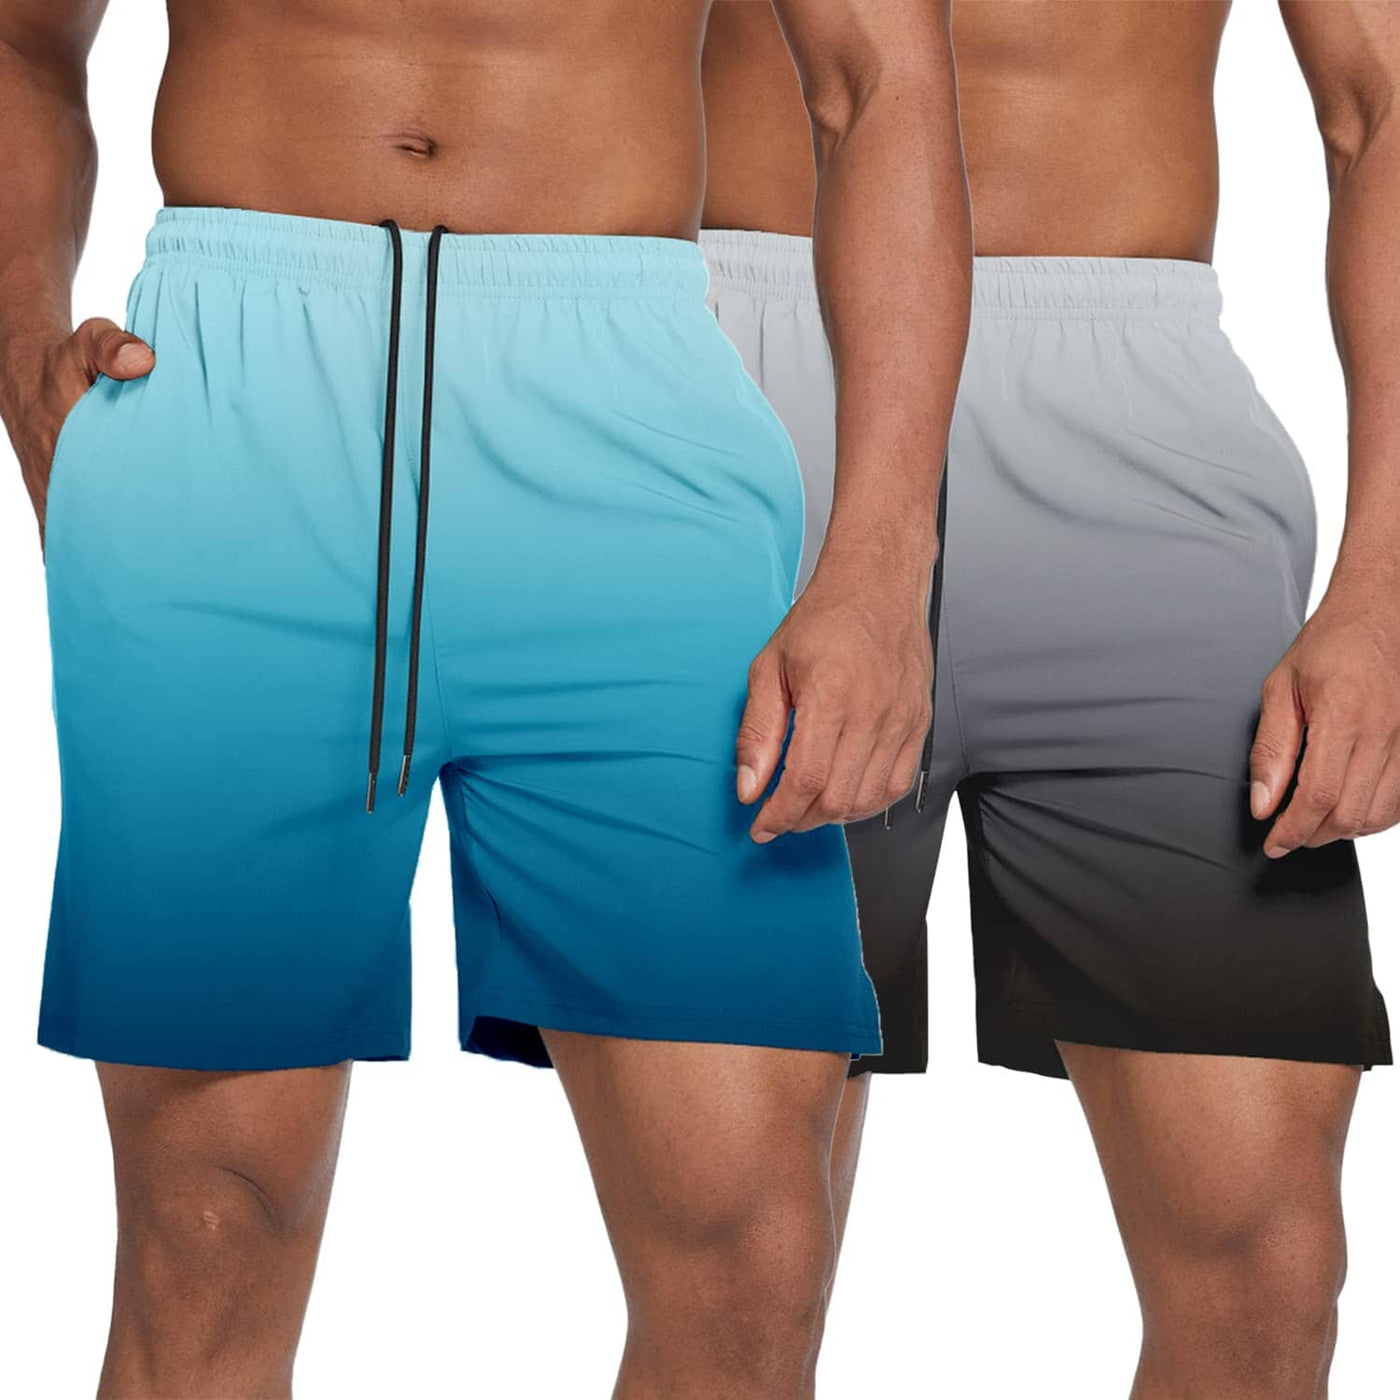 Coofandy Men's 2 Pack Gym Workout Shorts (US Only) Pants coofandy Blue/Grey S 